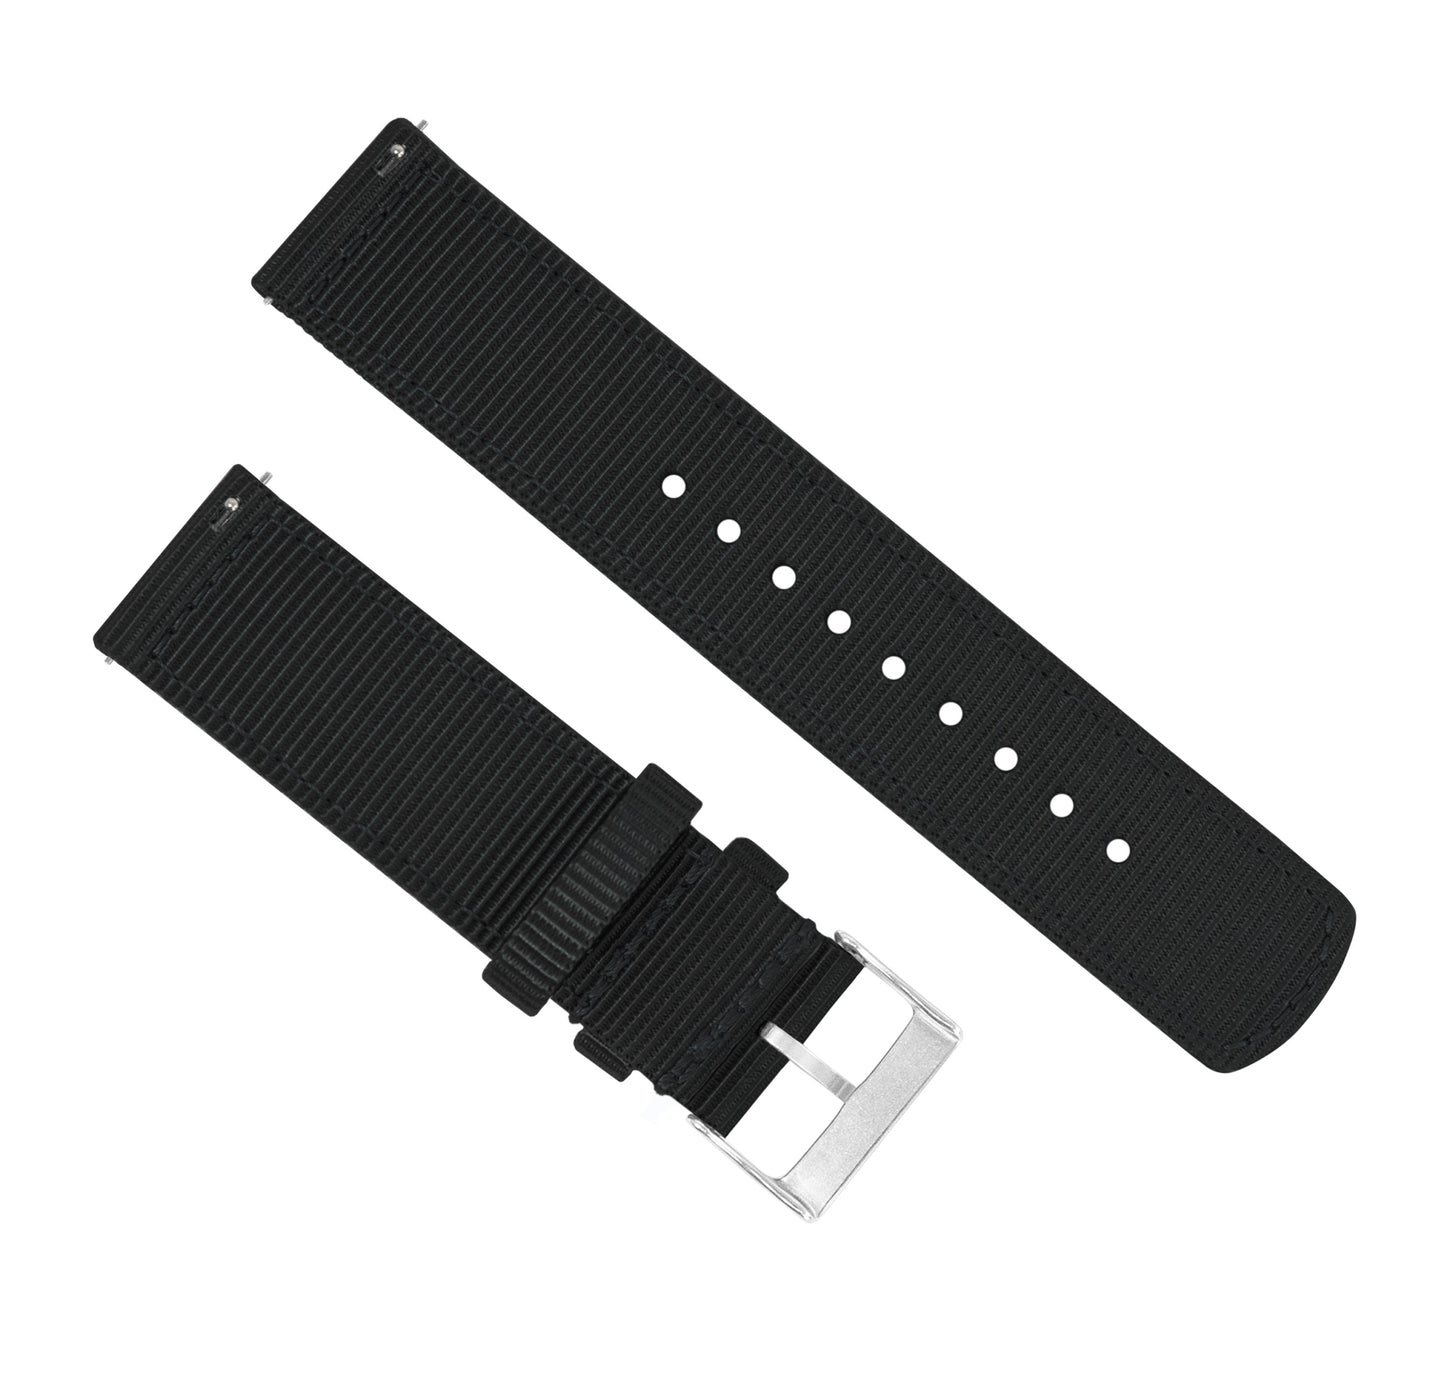 Fossil Gen 5 | Two-Piece NATO Style | Black - Barton Watch Bands